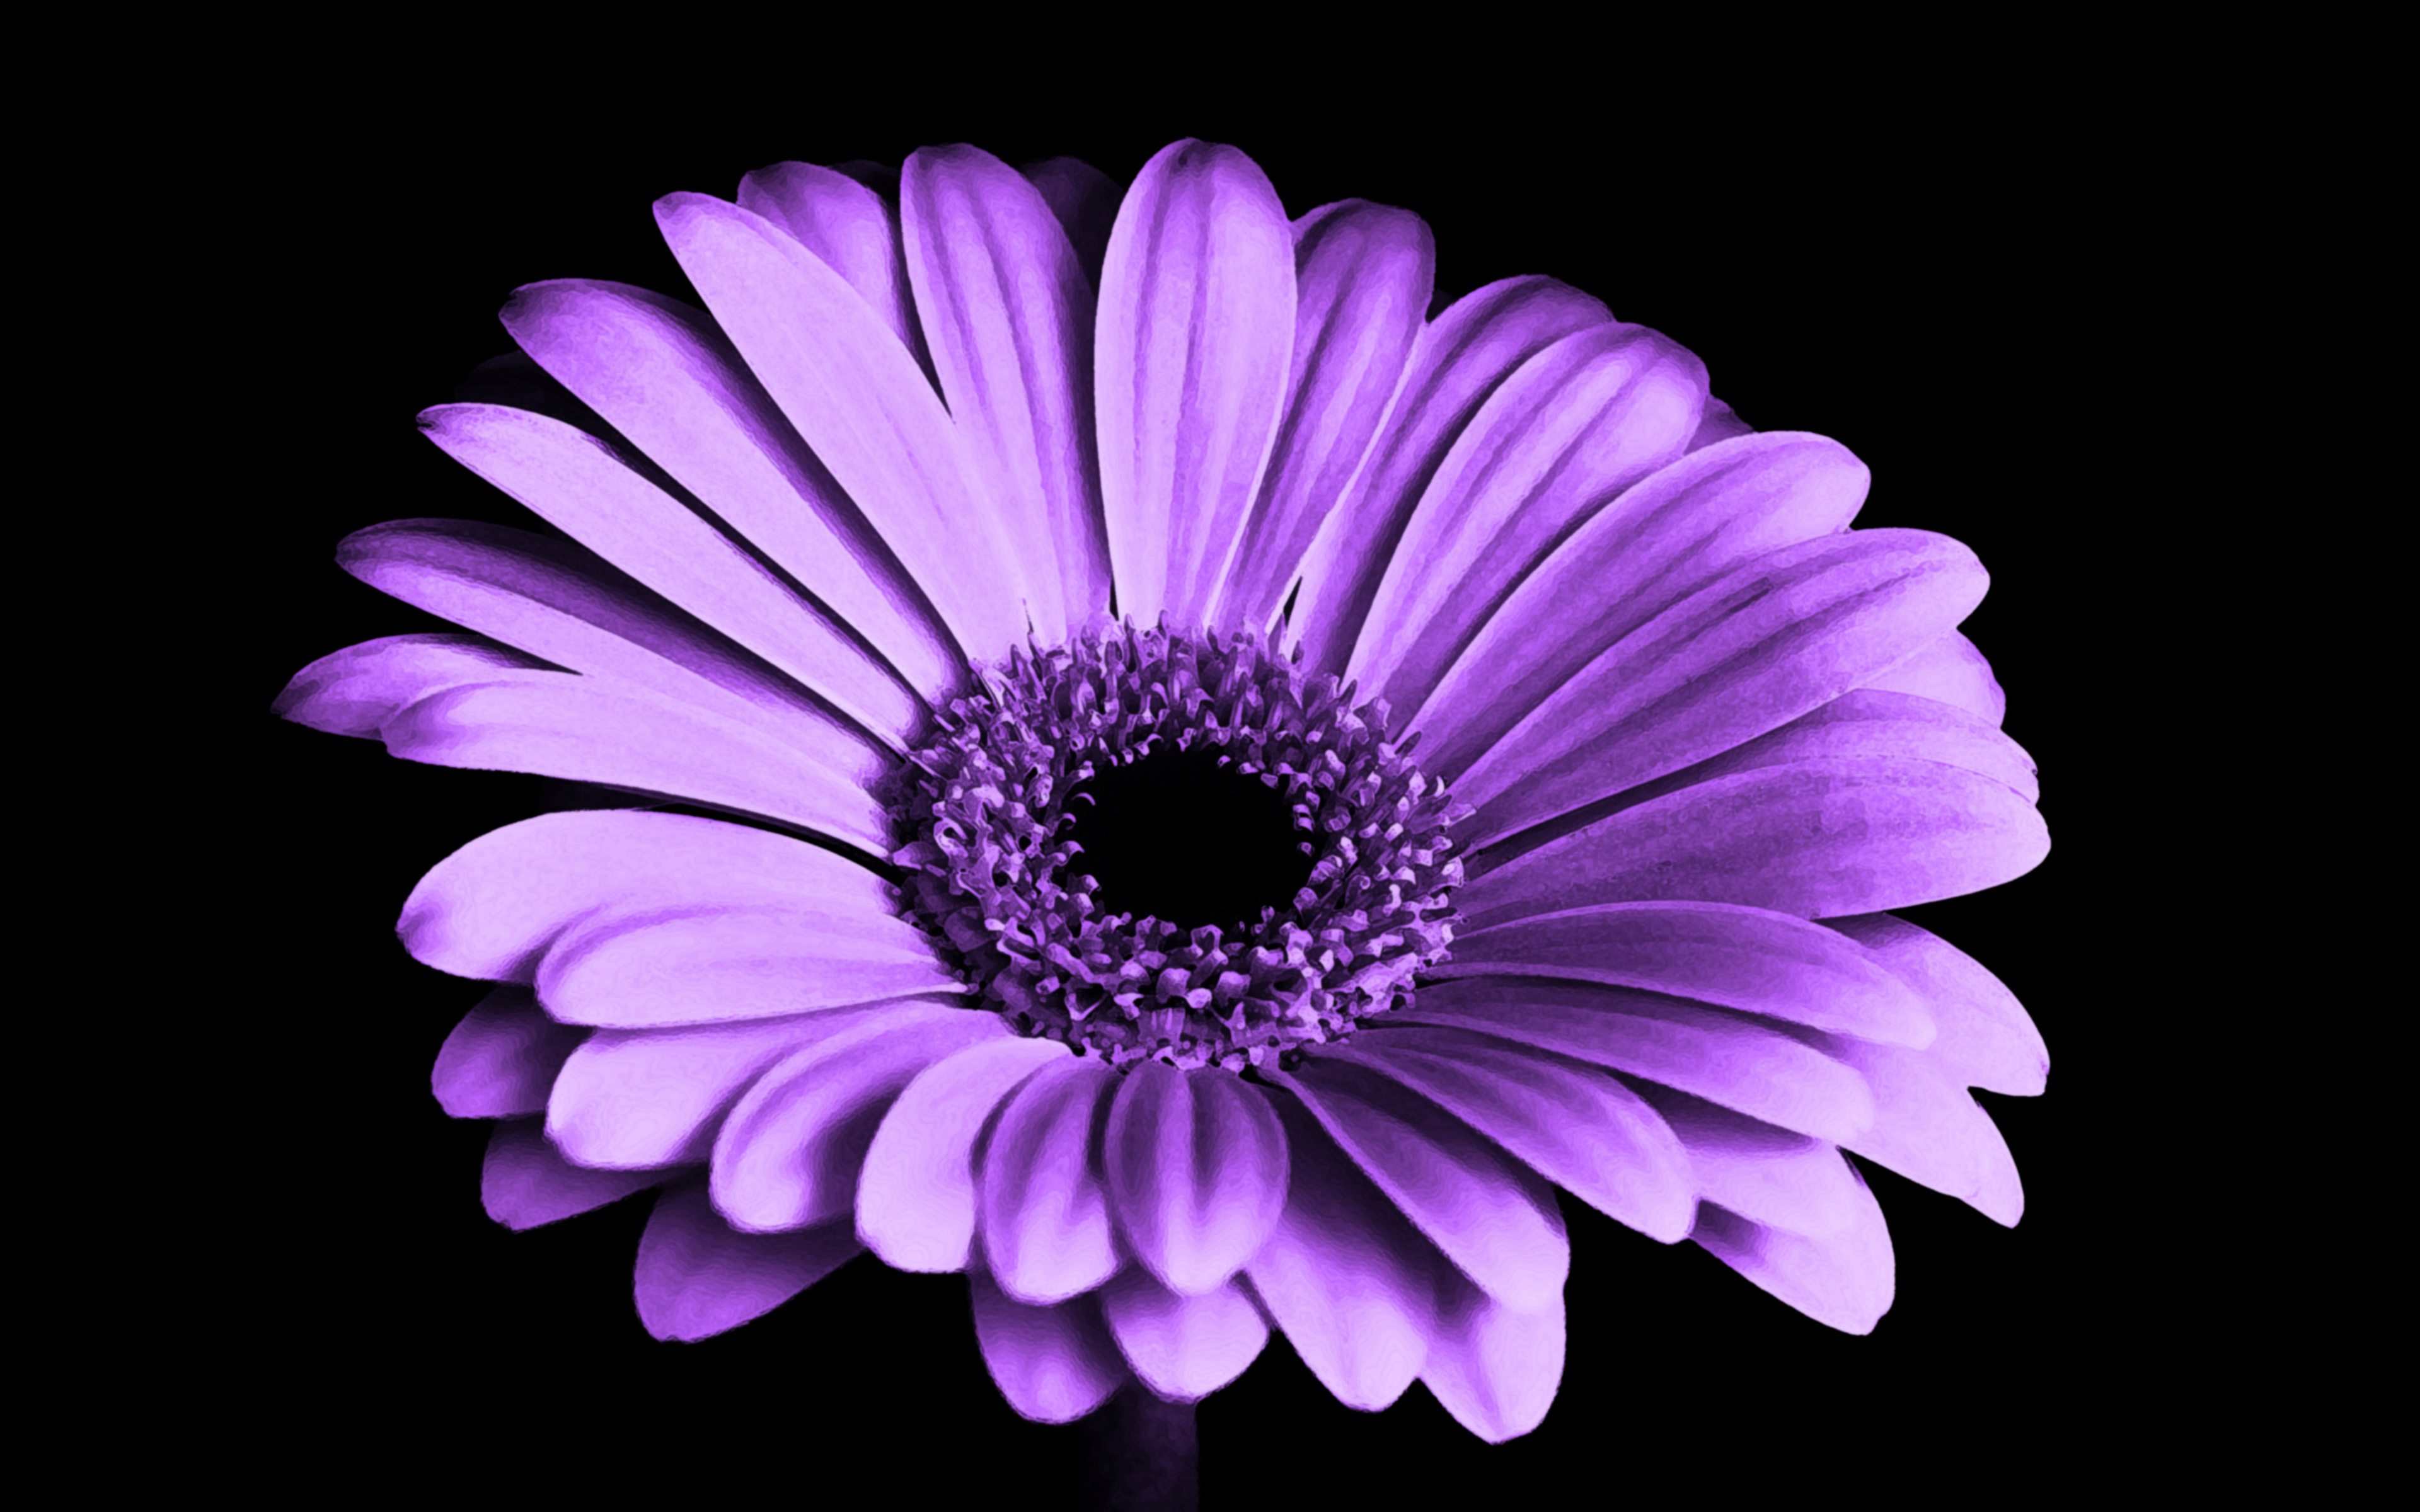 Violet Daisy Flower 4K Wallpapers | HD Wallpapers | ID #21179